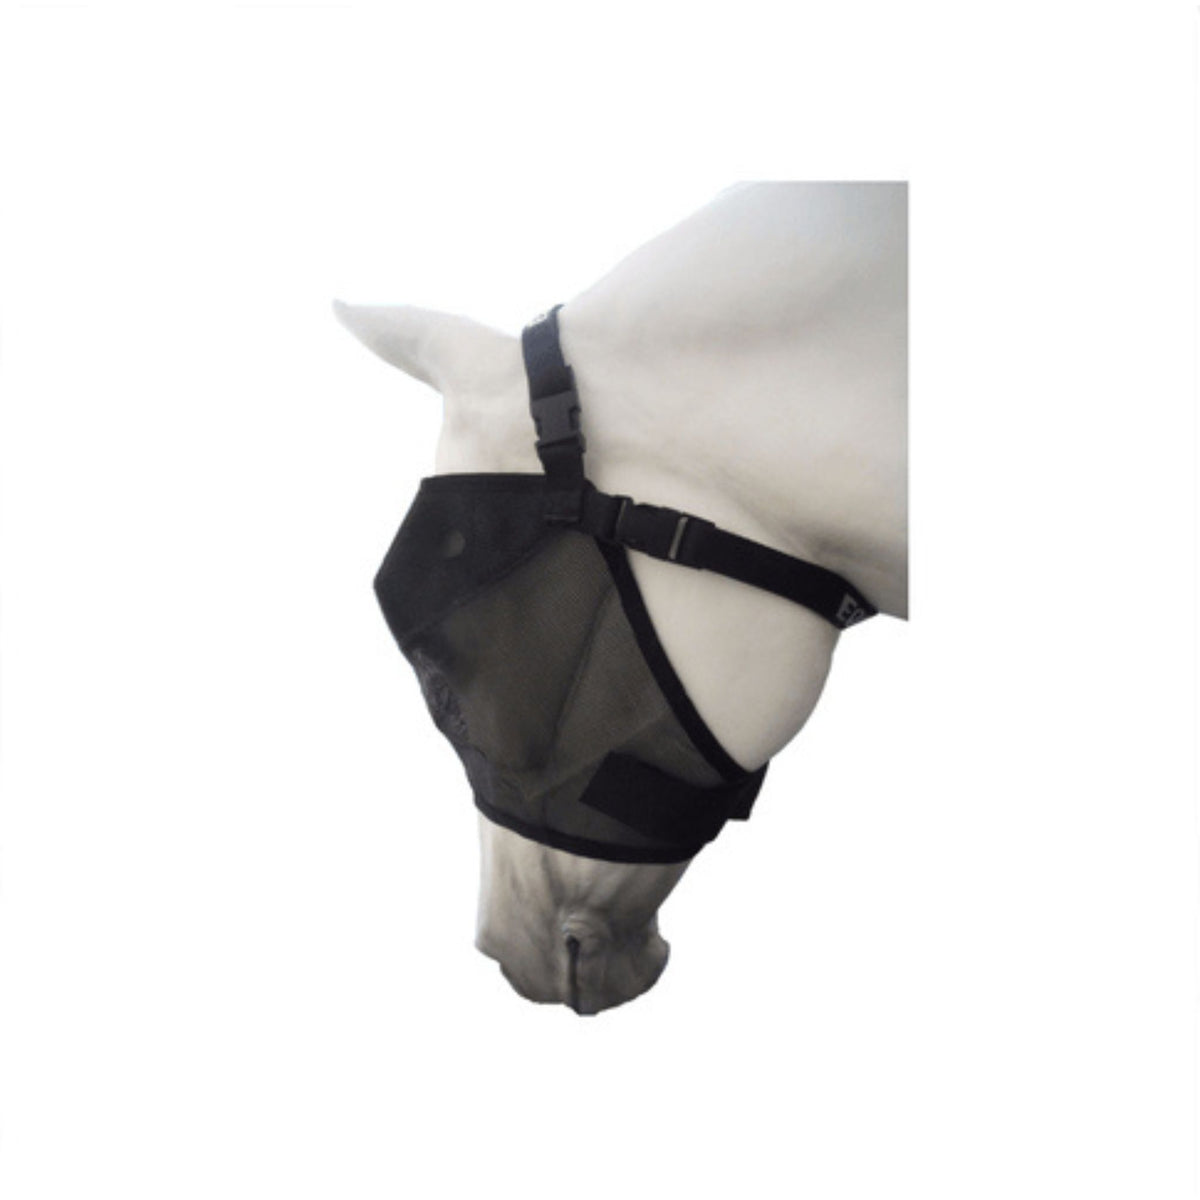 Side view of standard black fly mask with clips and velcro.